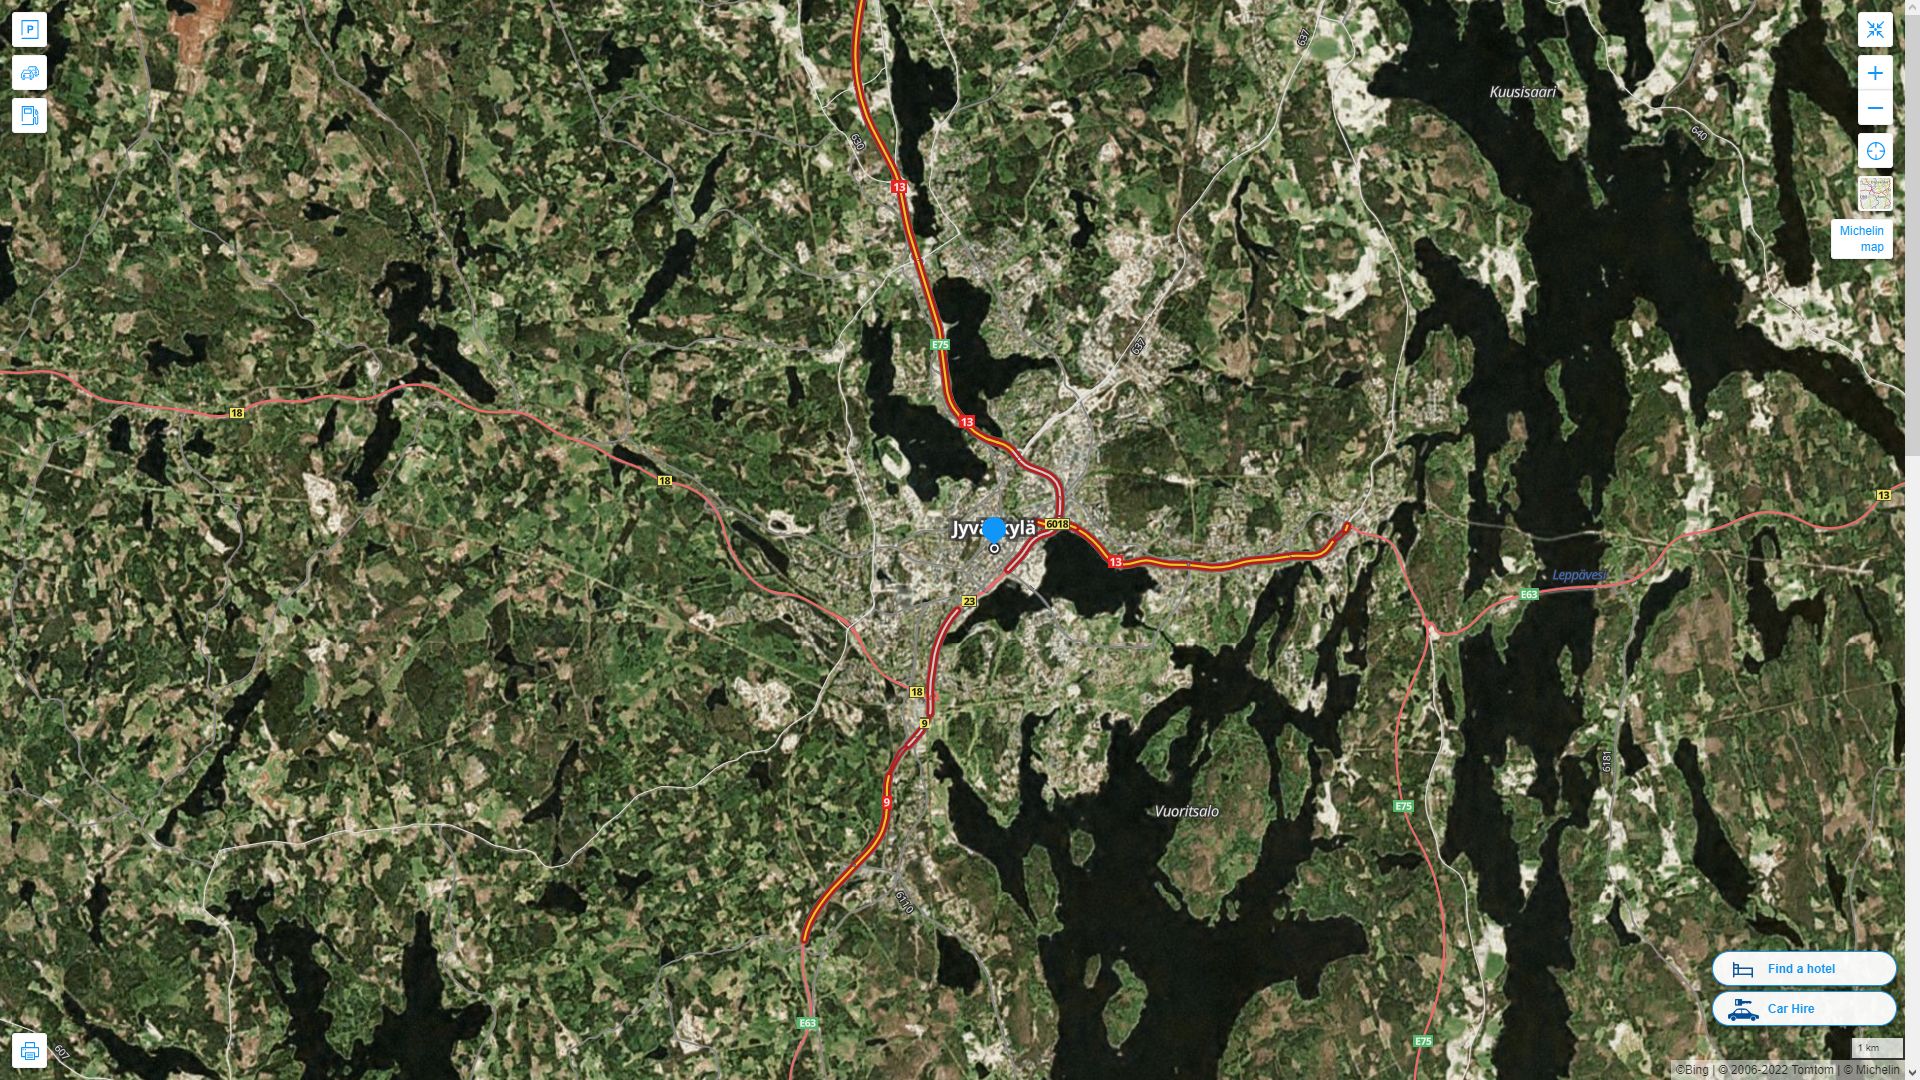 Jyvaskyla Highway and Road Map with Satellite View